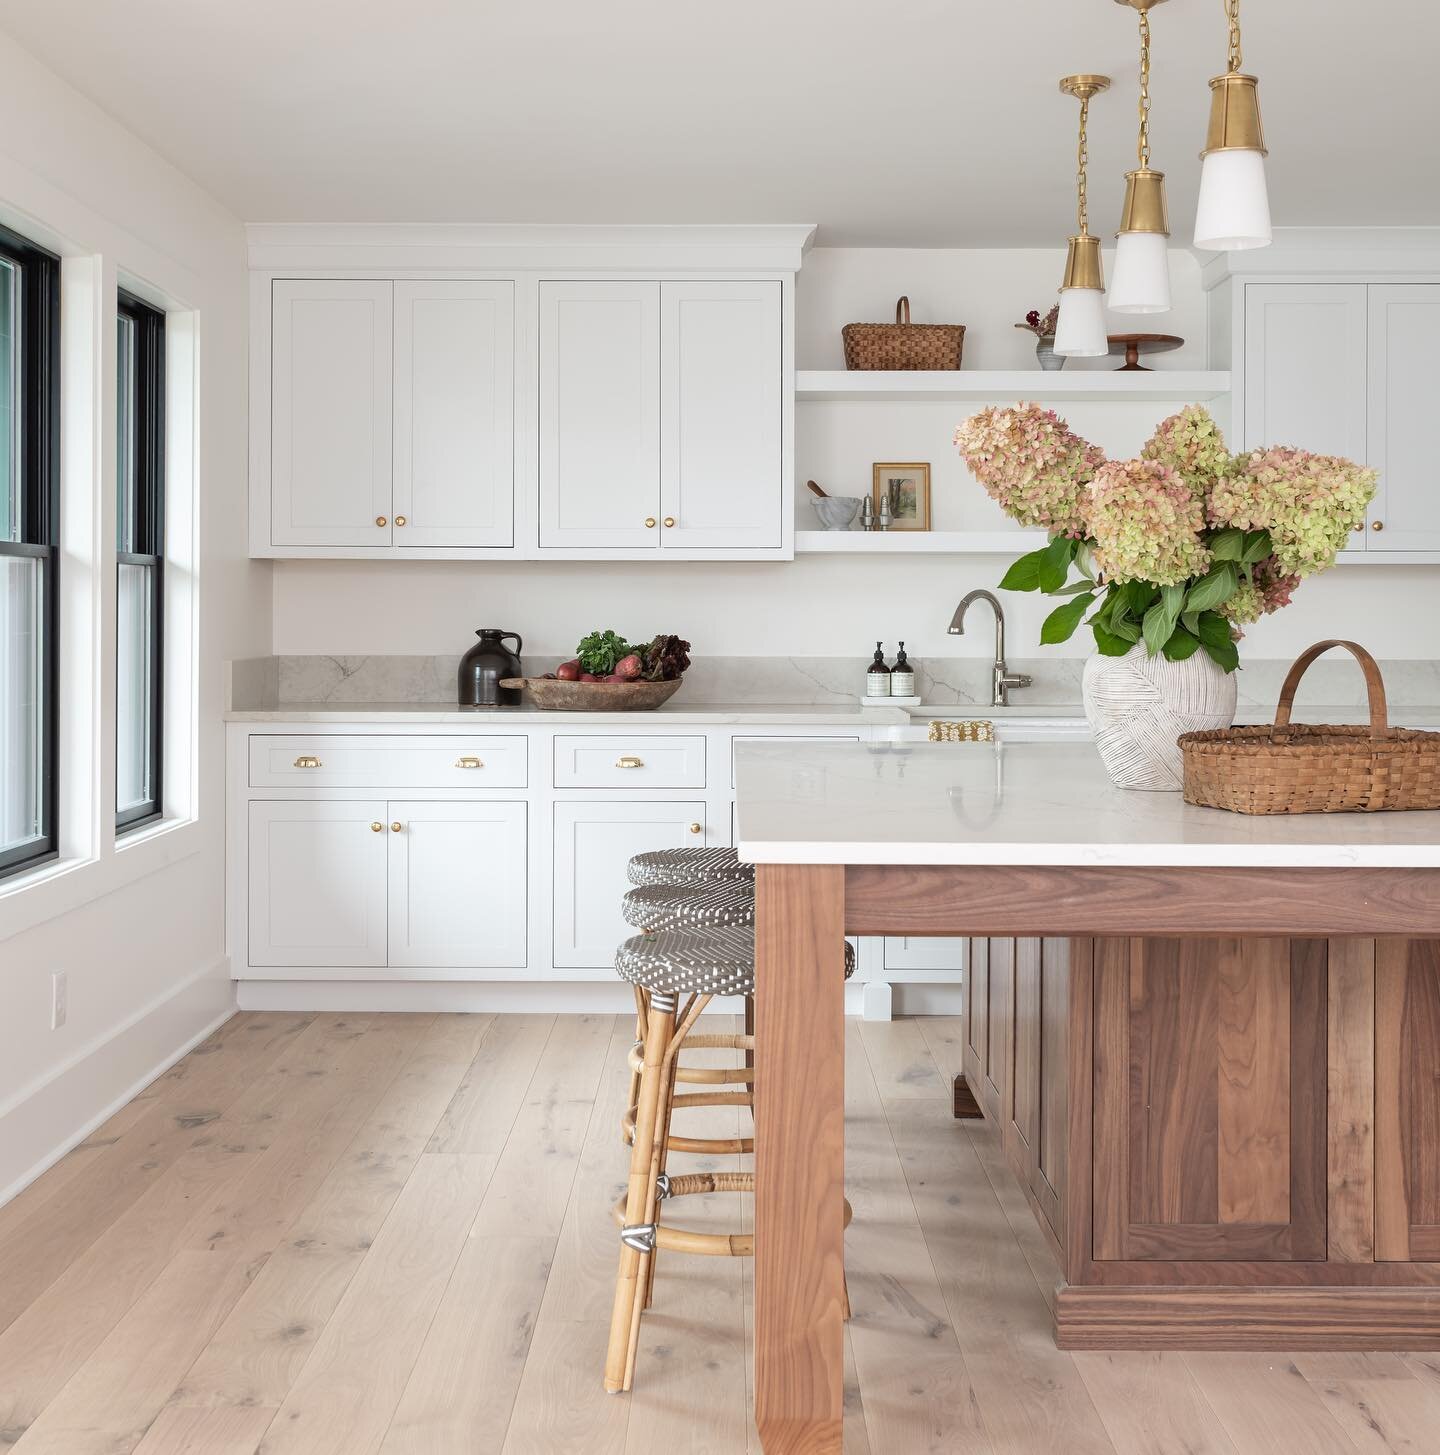 Aren&rsquo;t clean kitchens the best motivators out there? If my kitchen is clean I feel like a super hero 😅 #cgdmodernenglish 

#cleankitchen #chestnutgrovedesigns #christinawikmaninteriors #classickitchen #modernfarmhouse #kitchensofinsta #newengl